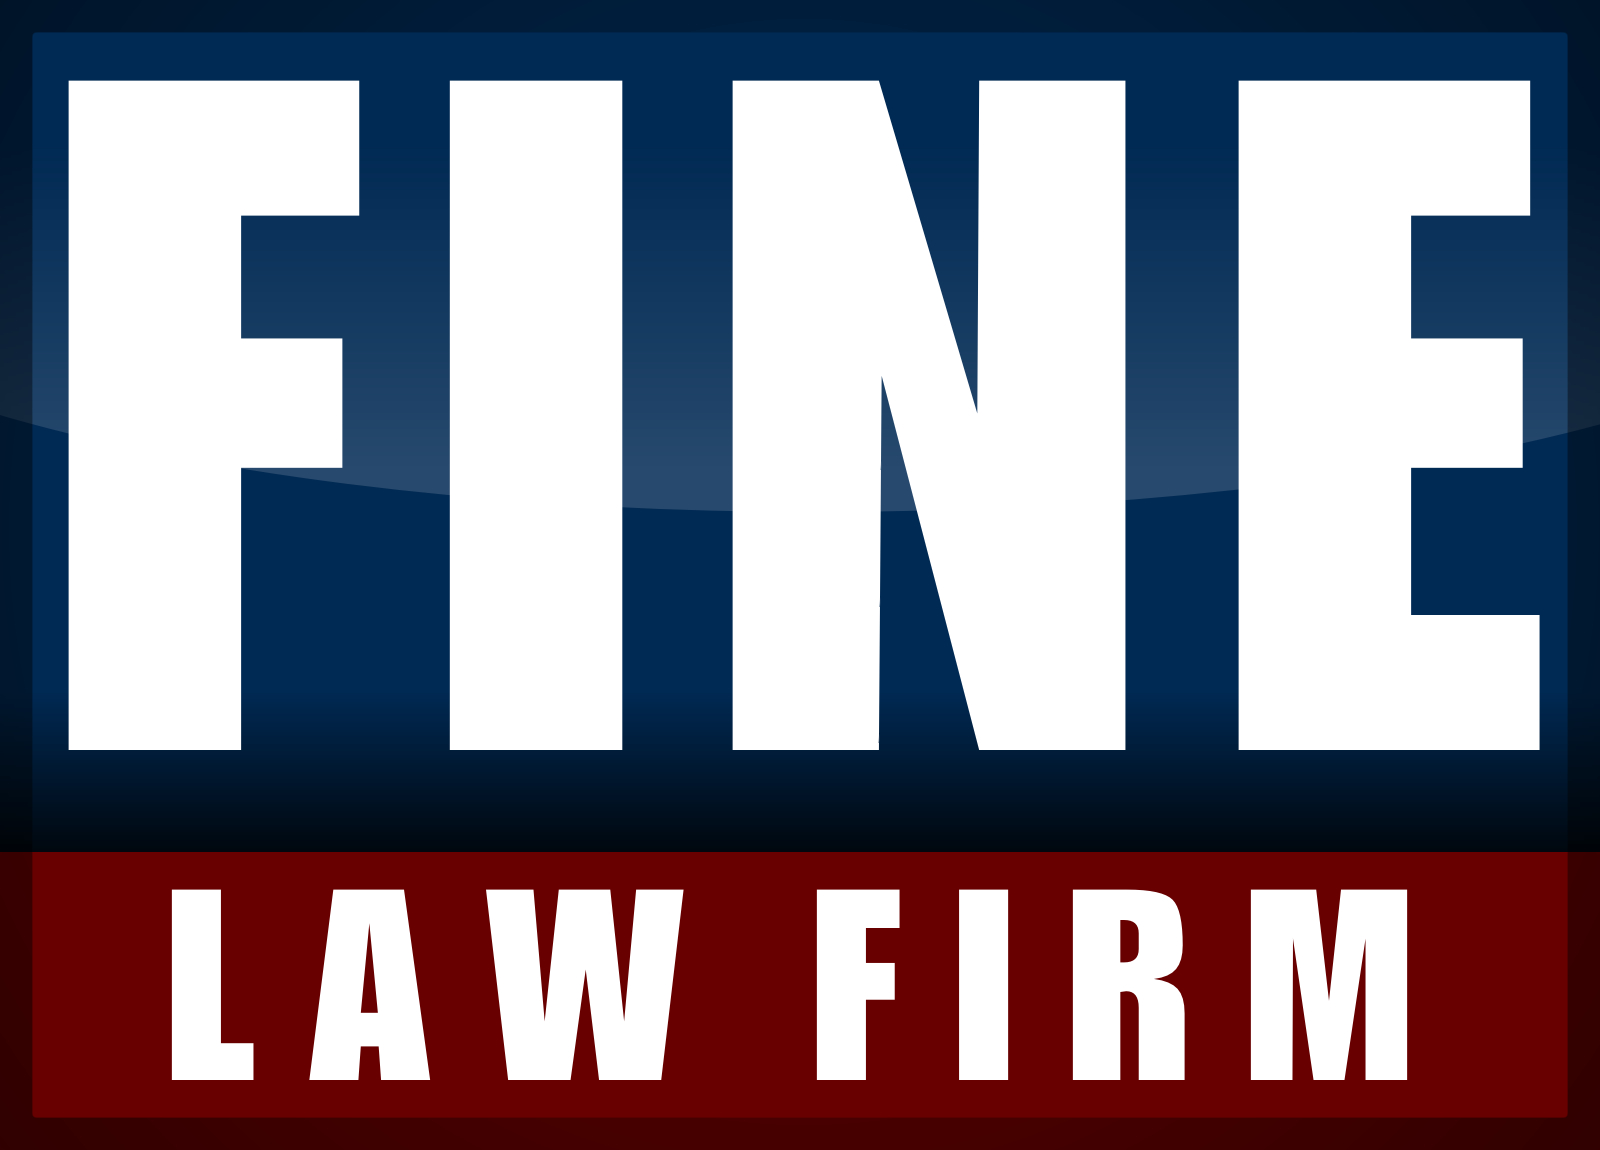 The Fine Law Firm